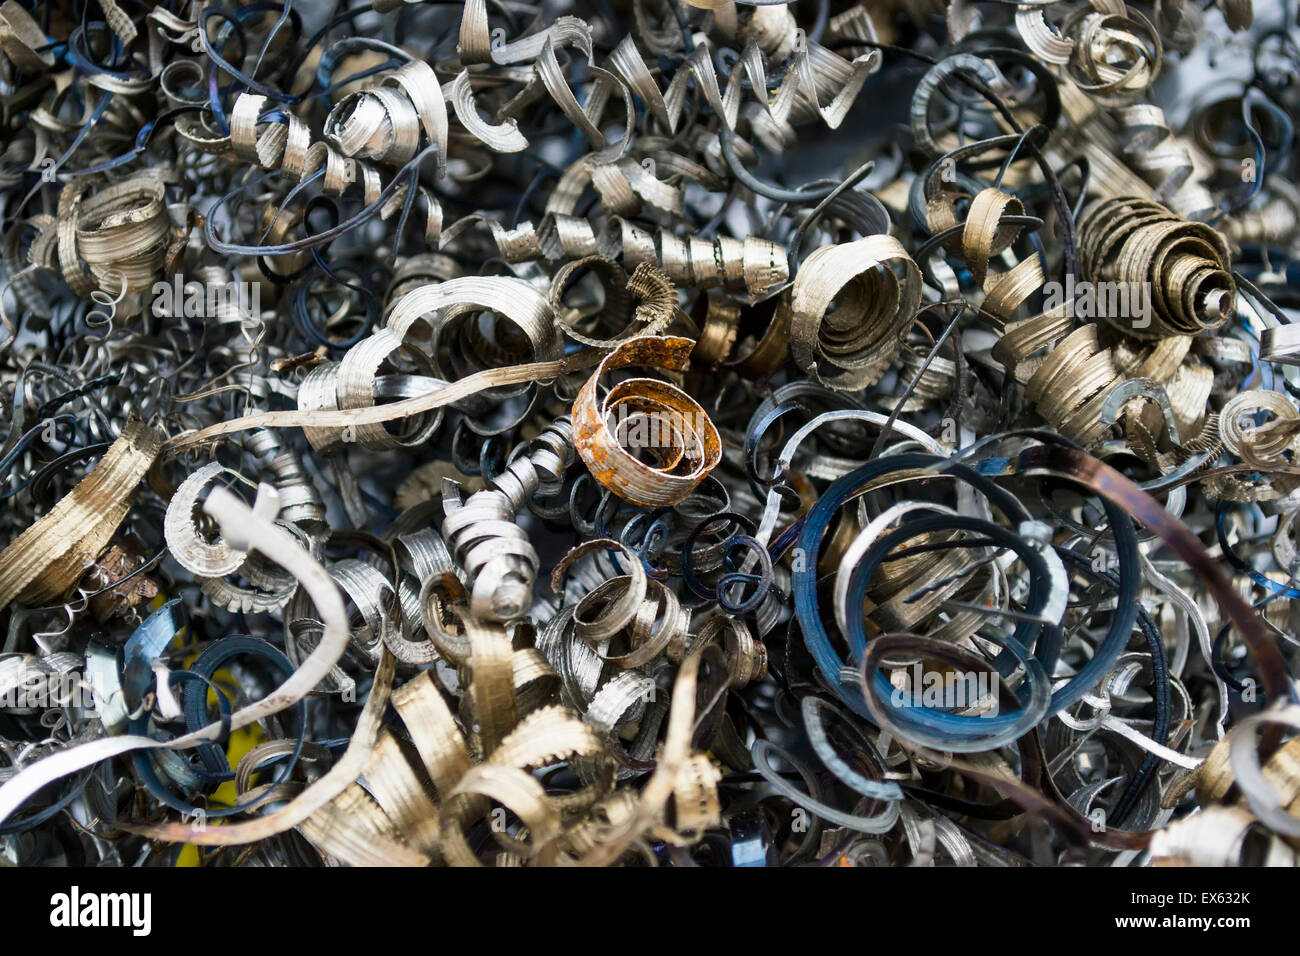 Curled metallic cuts or swarf from metal machining tool, background Stock Photo